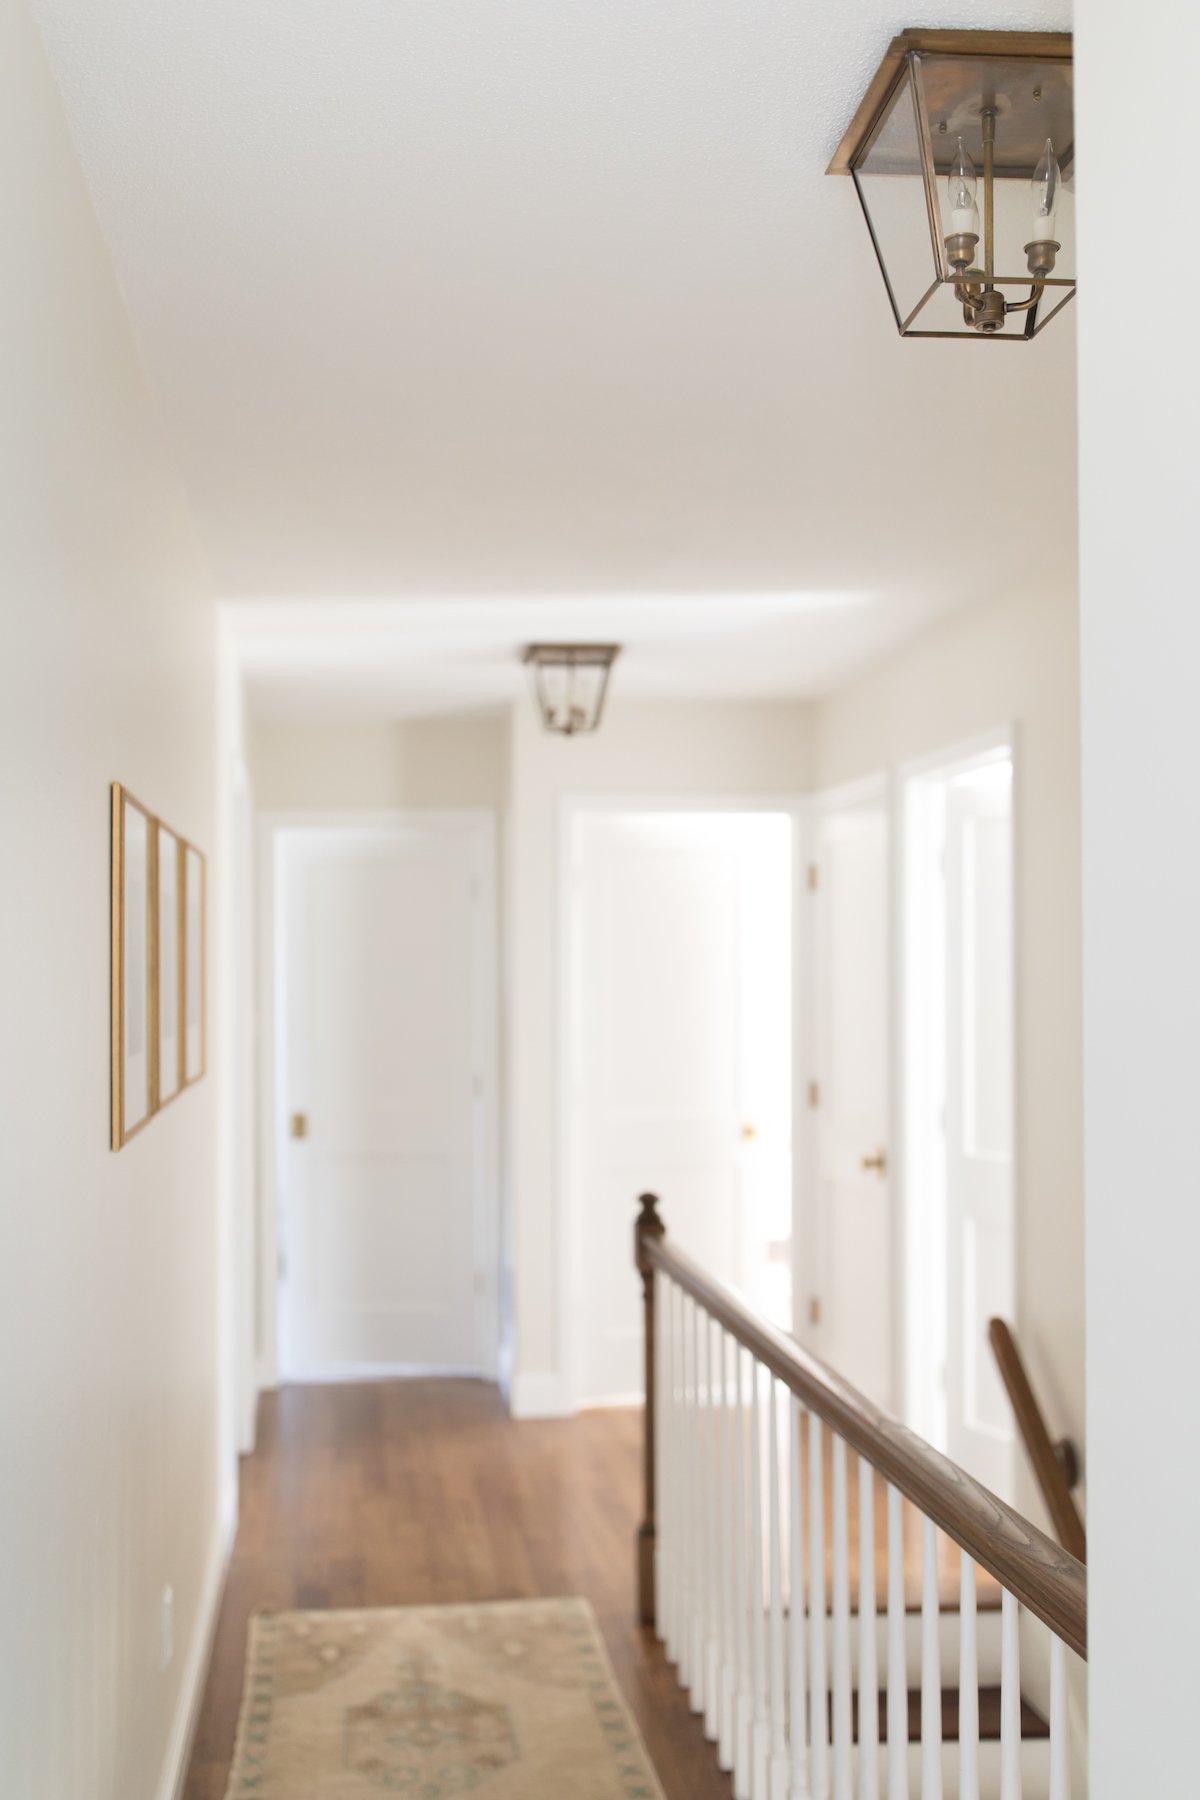 A hallway with white walls, wood floors and flush mount lanterns in a brass finish. 